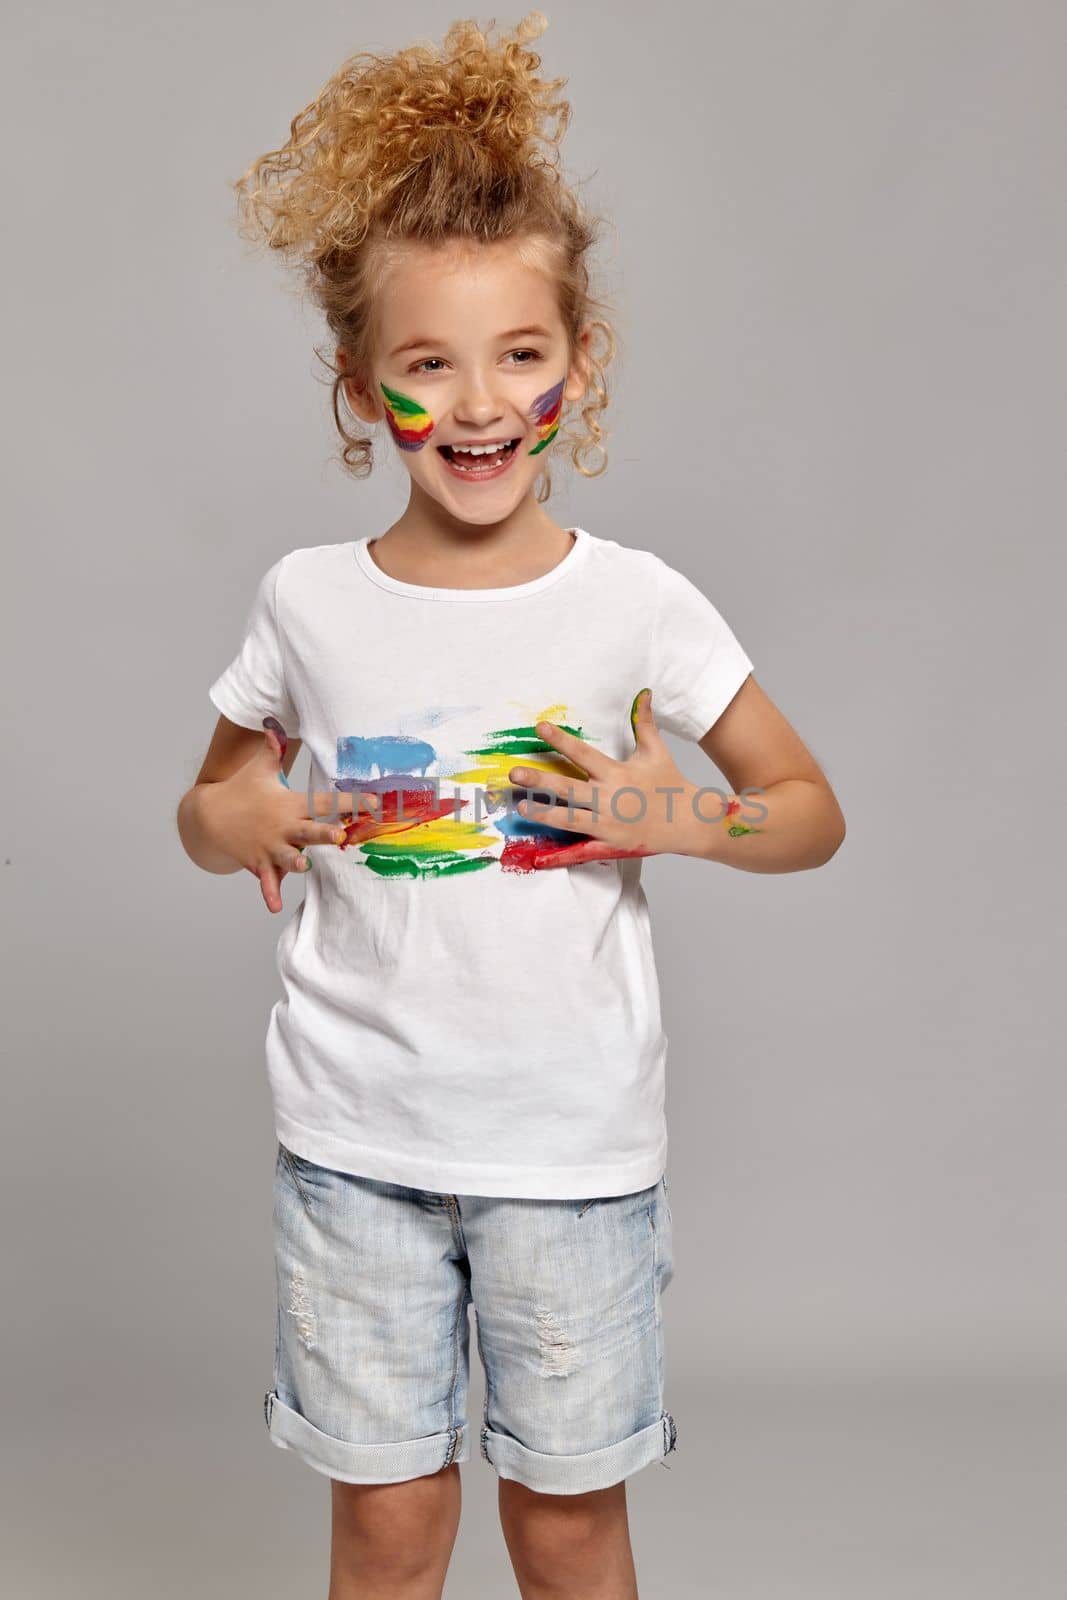 Wonderful little girl having a brush in her lovely haircut, wearing in a white t-shirt. She is smearing her t-shirt, laughing and looking away, on a gray background.